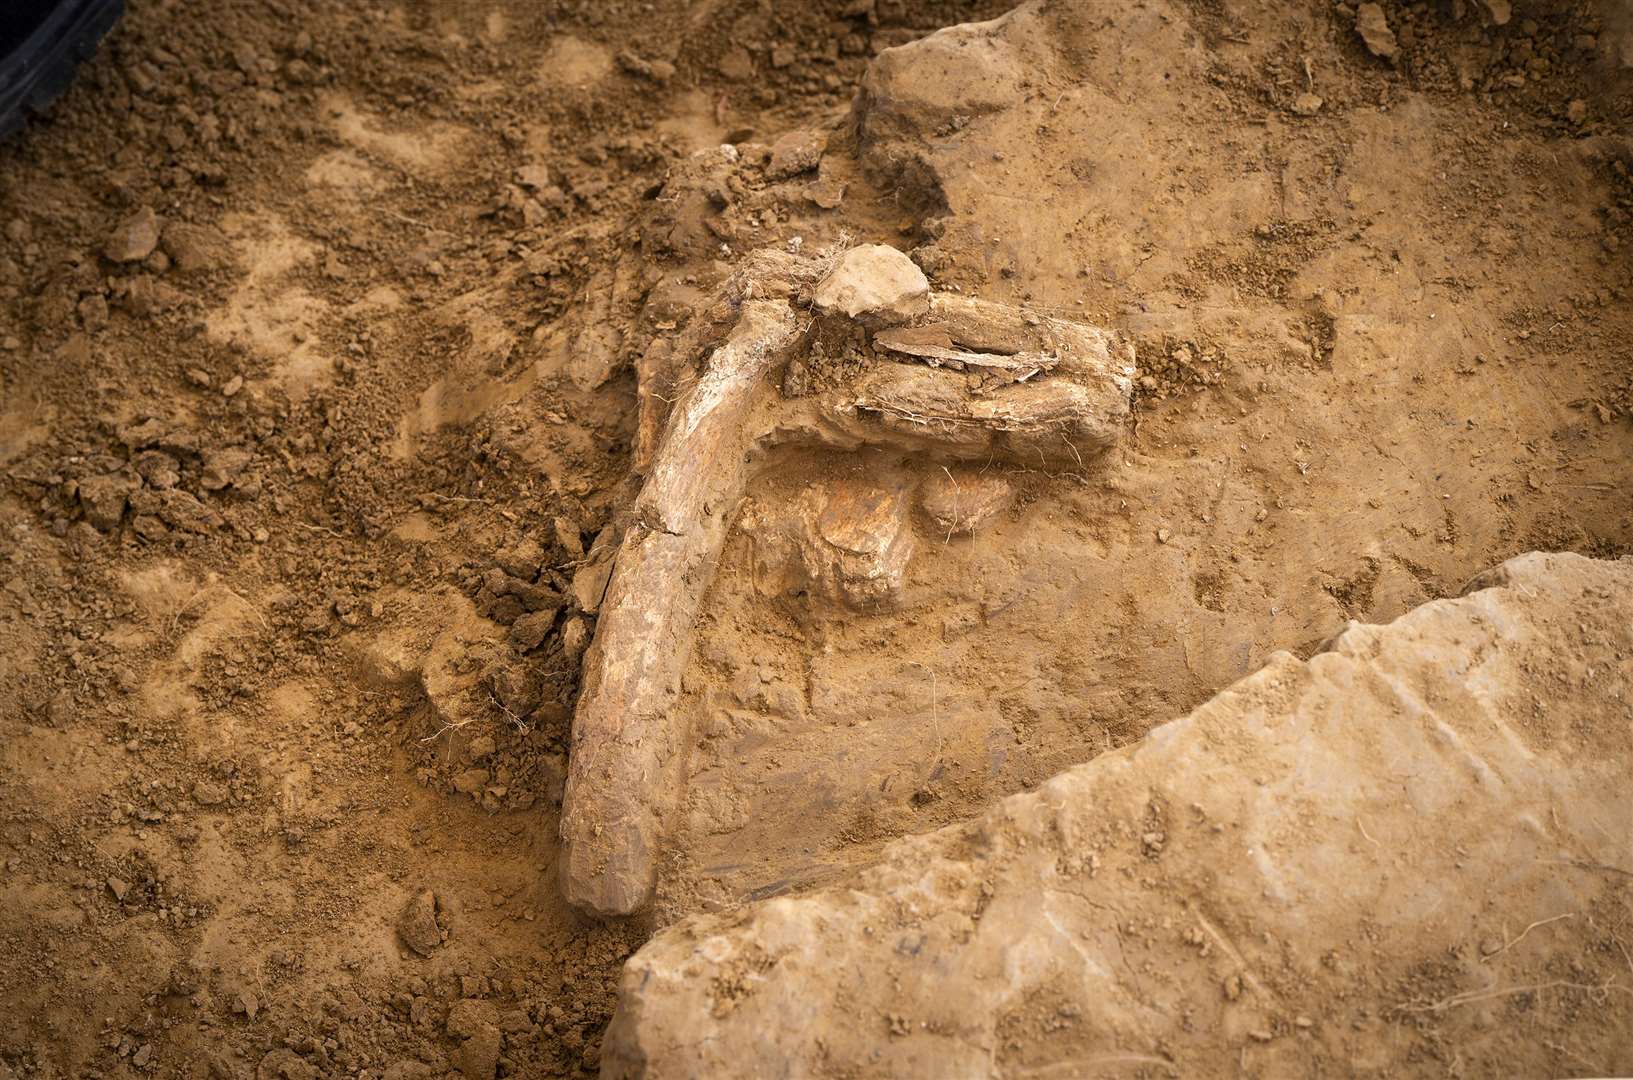 Bones discovered at Mont-Saint-Jean farm (Chris Van Houts/Waterloo Uncovered)